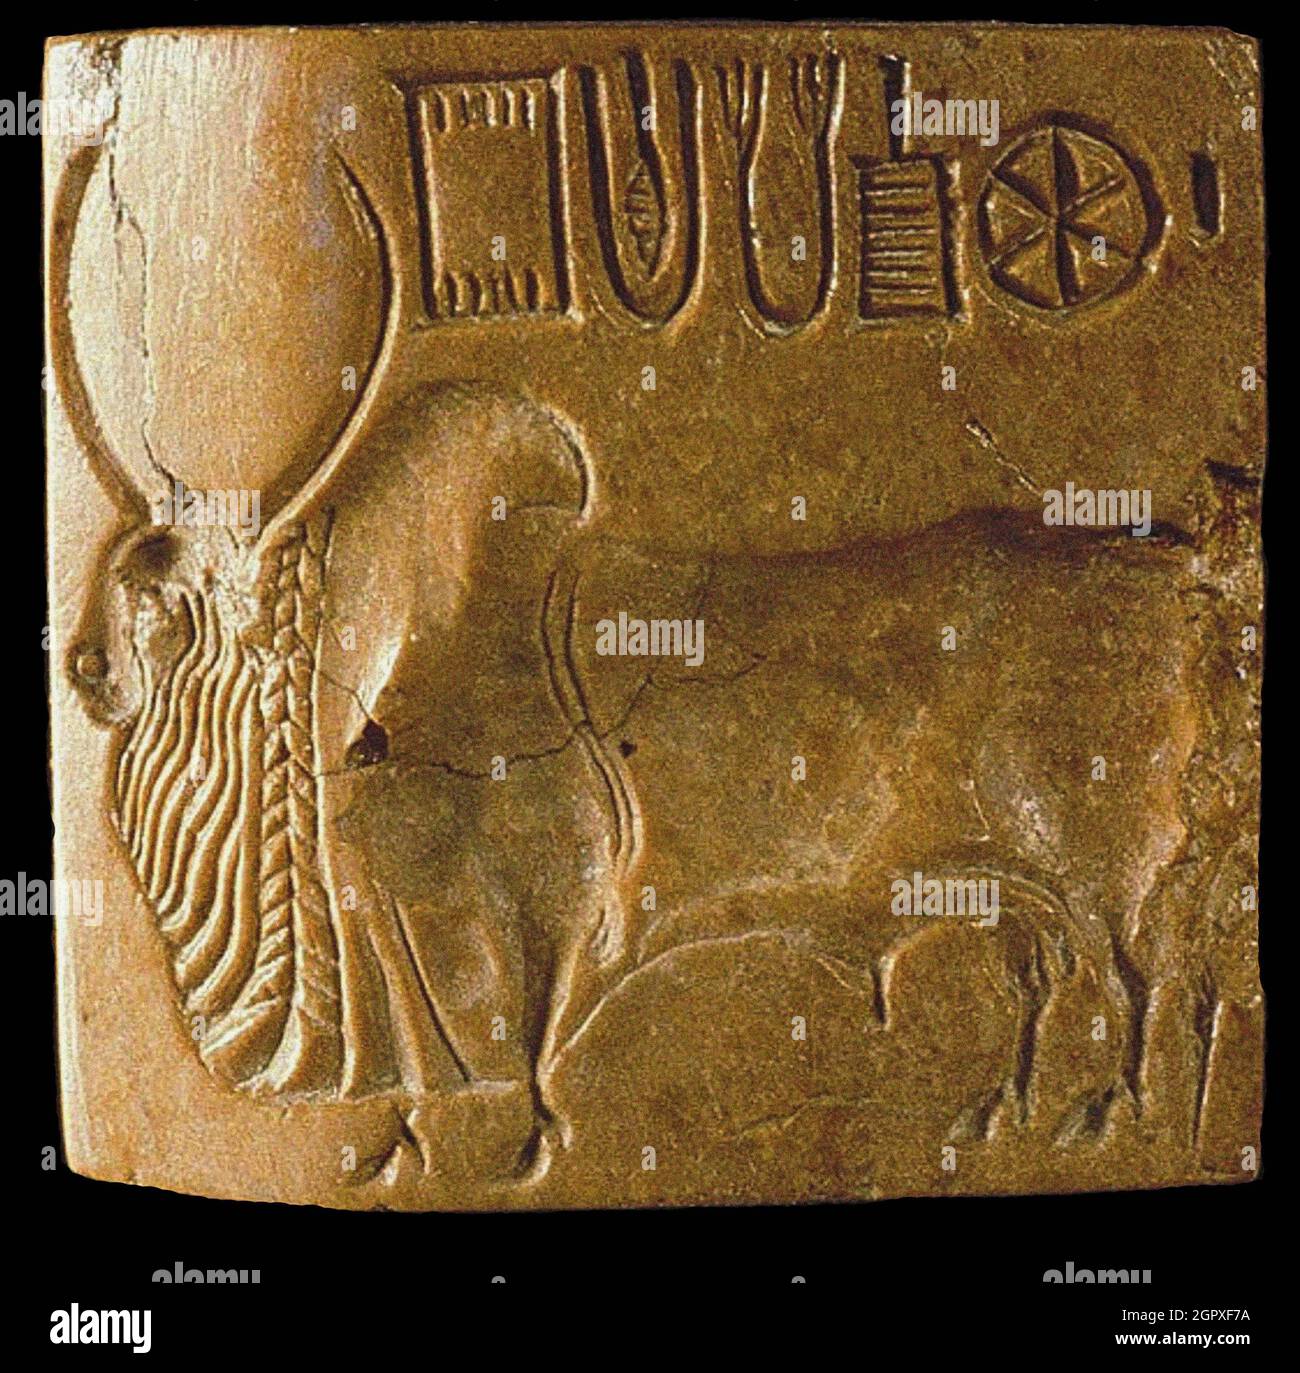 Zebu Bull Seal with Indus Script Found at Mohenjo Daro, Indus Valley , 3rd millenium BC. Found in the Collection of the National Museum, New Delhi. Stock Photo